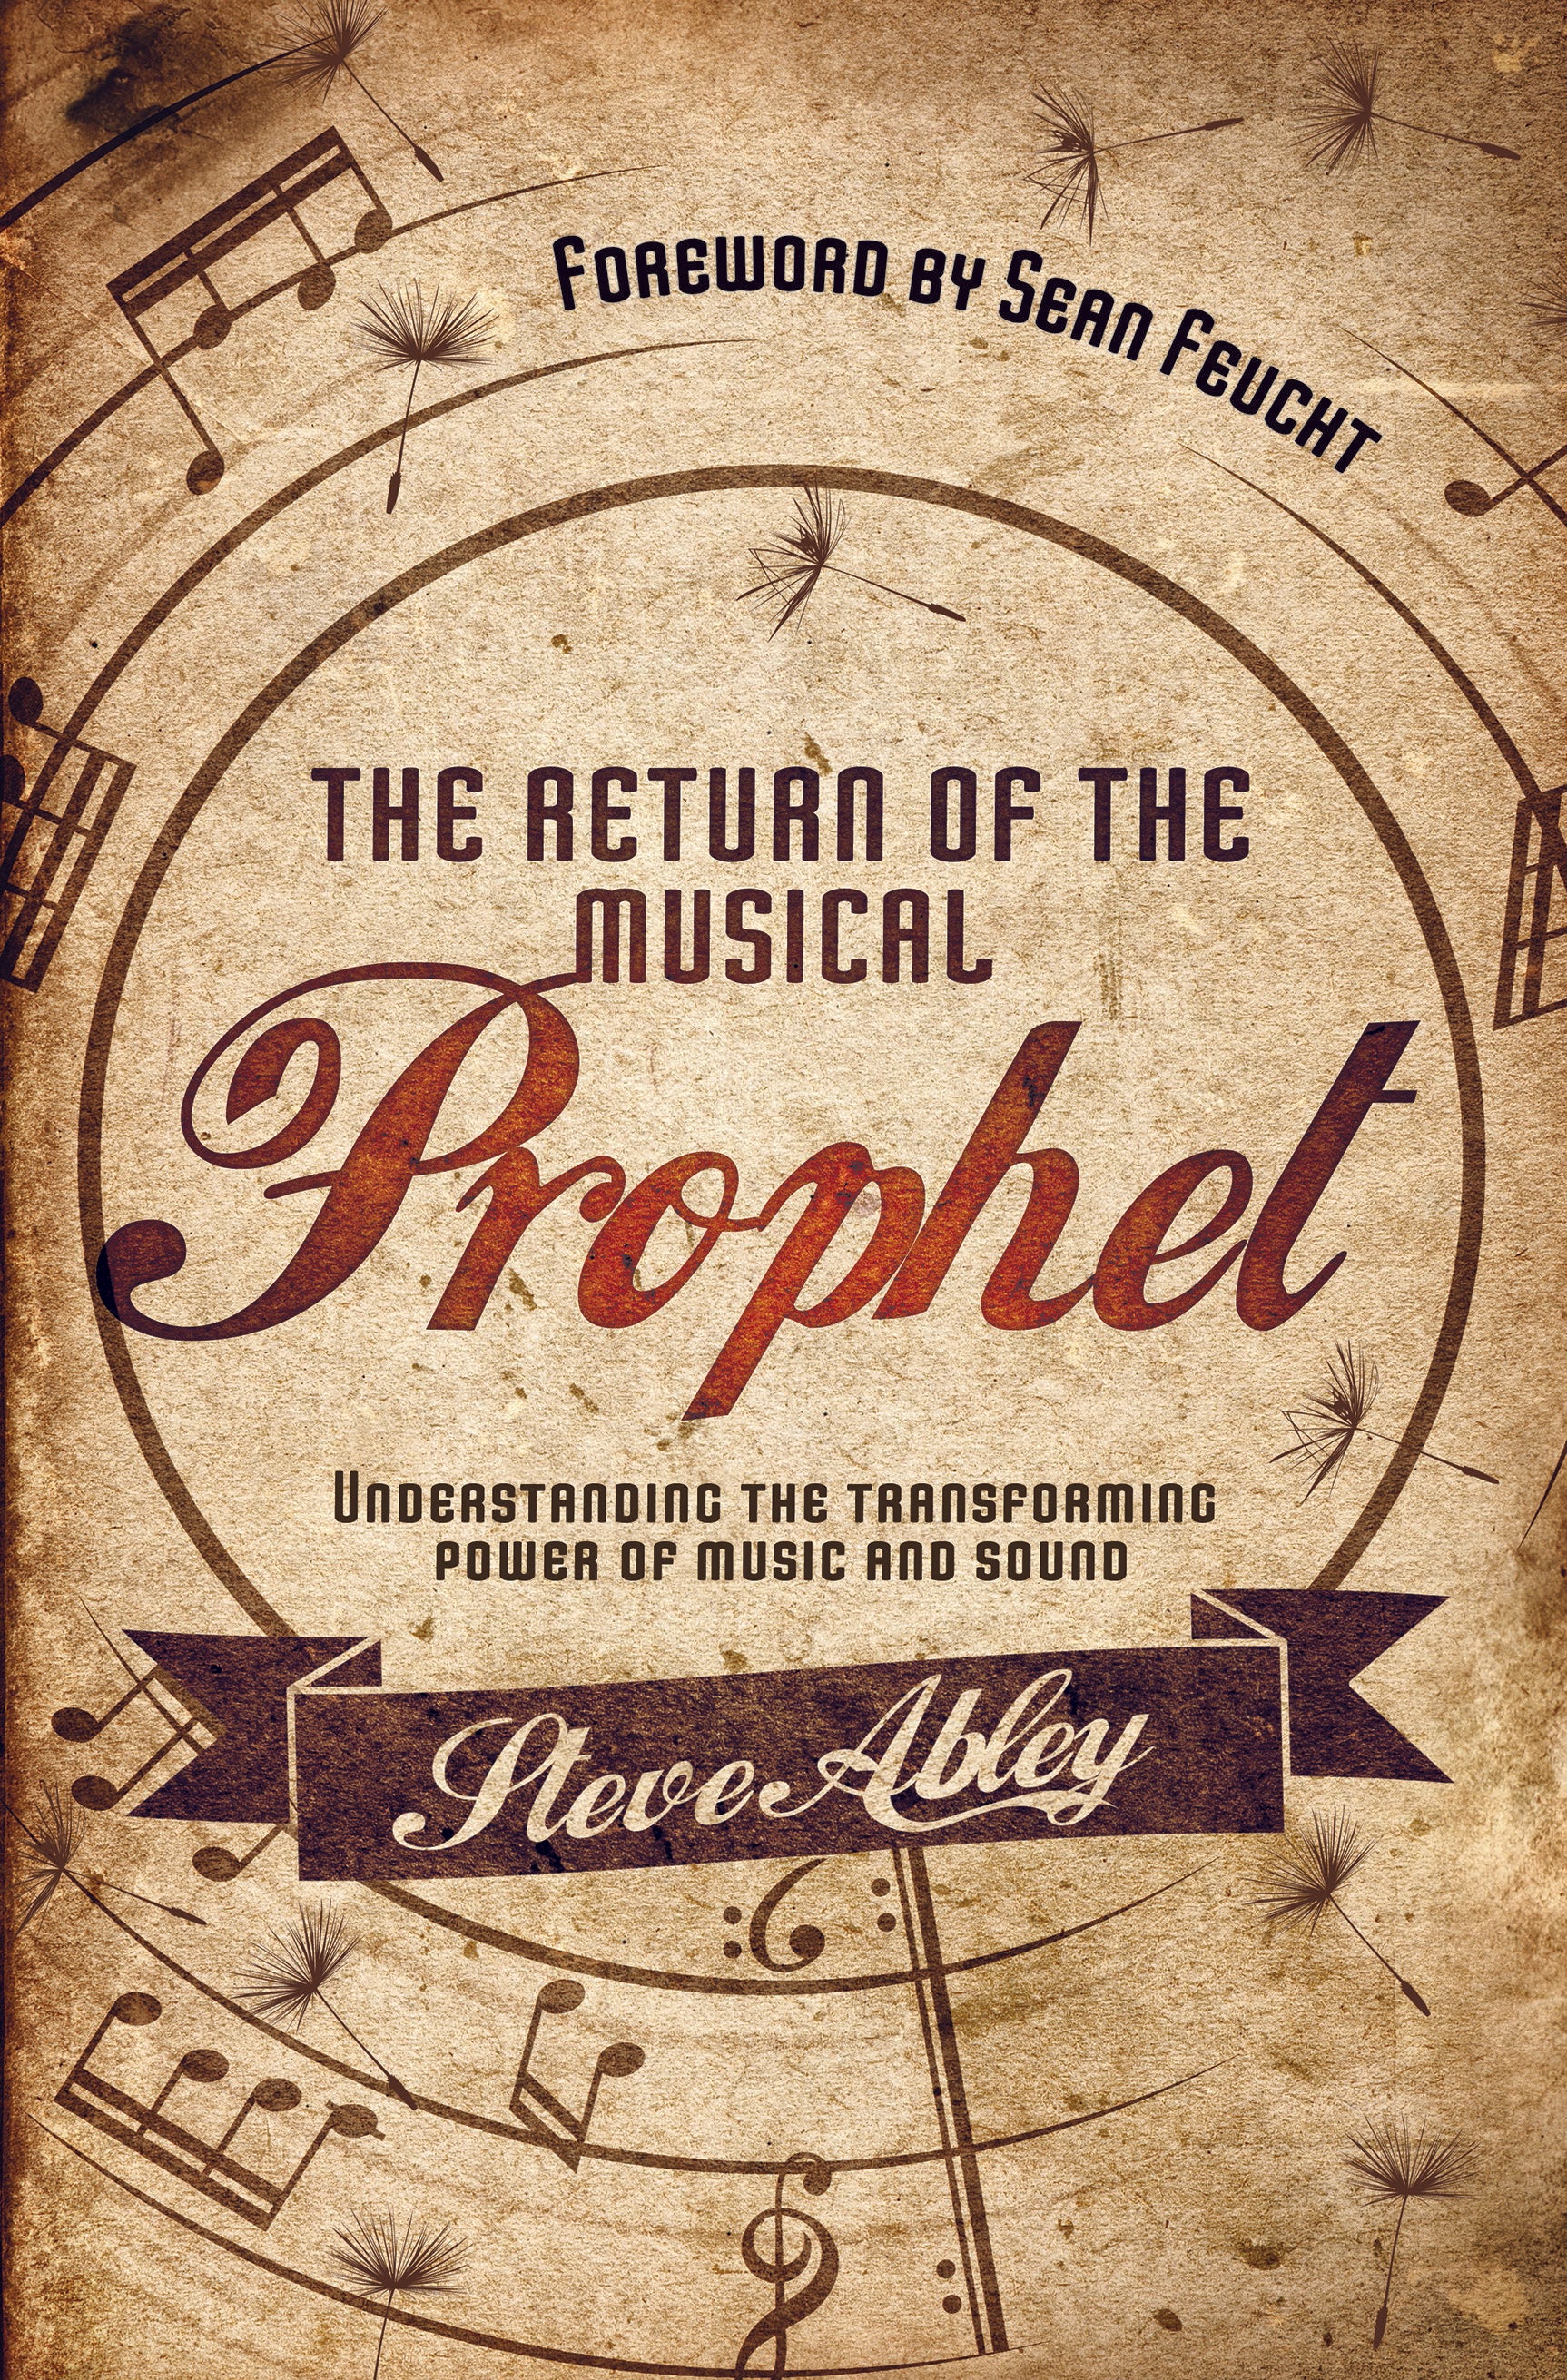 Image of The Return Of The Musical Prophet other